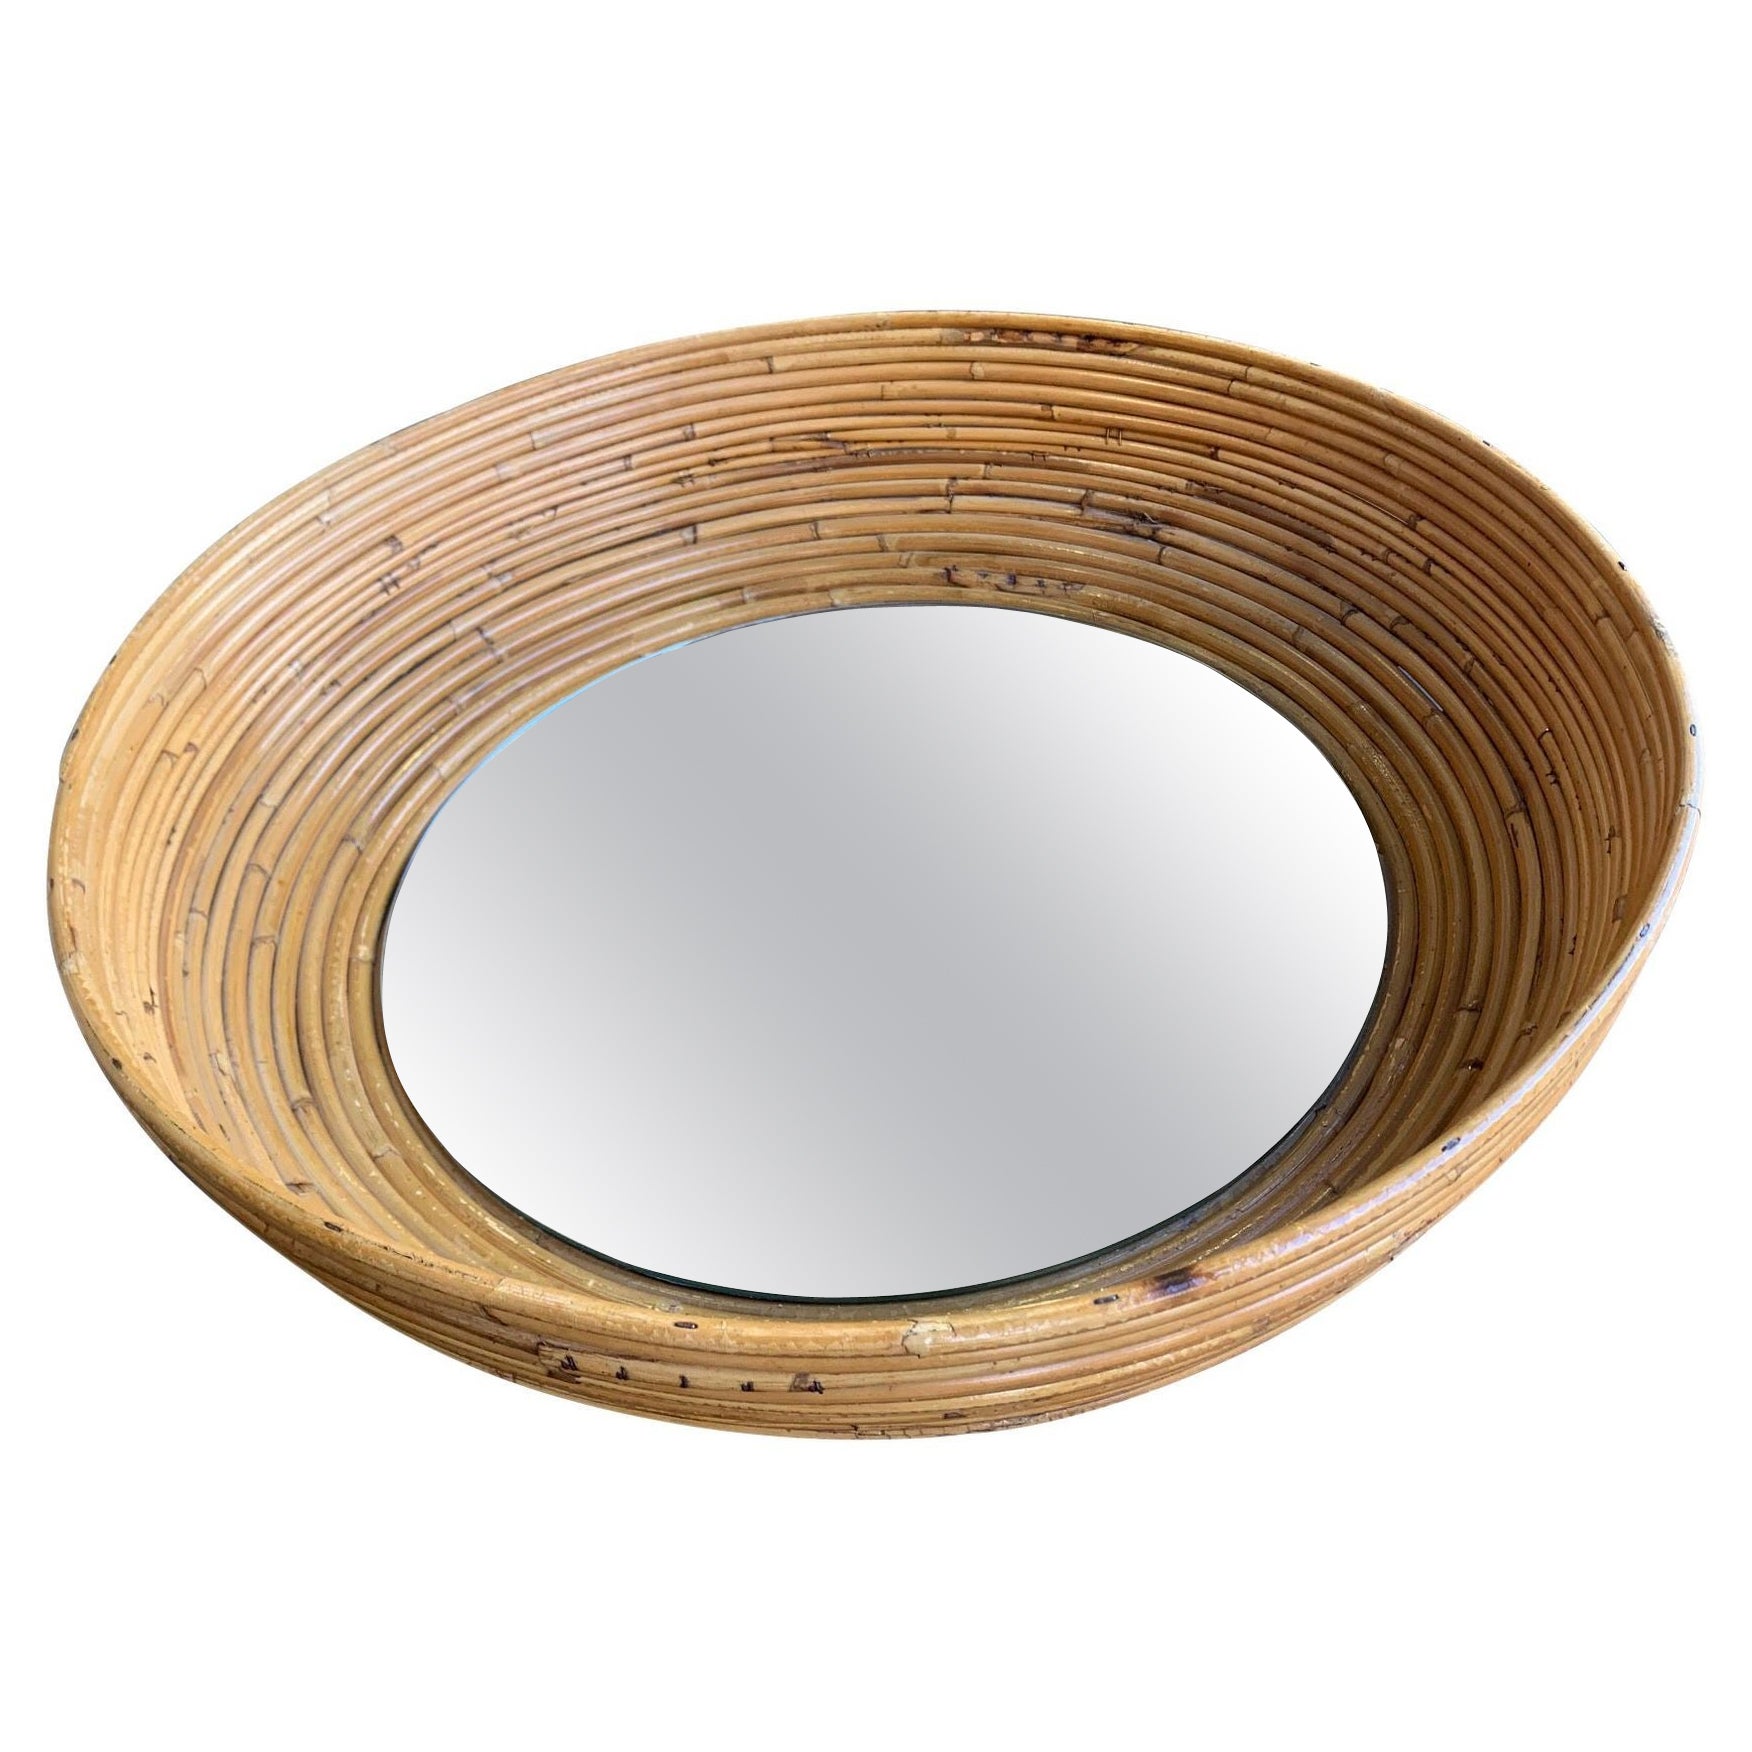 1960s French Riviera Circular Bowl Shaped Bamboo Mirror For Sale